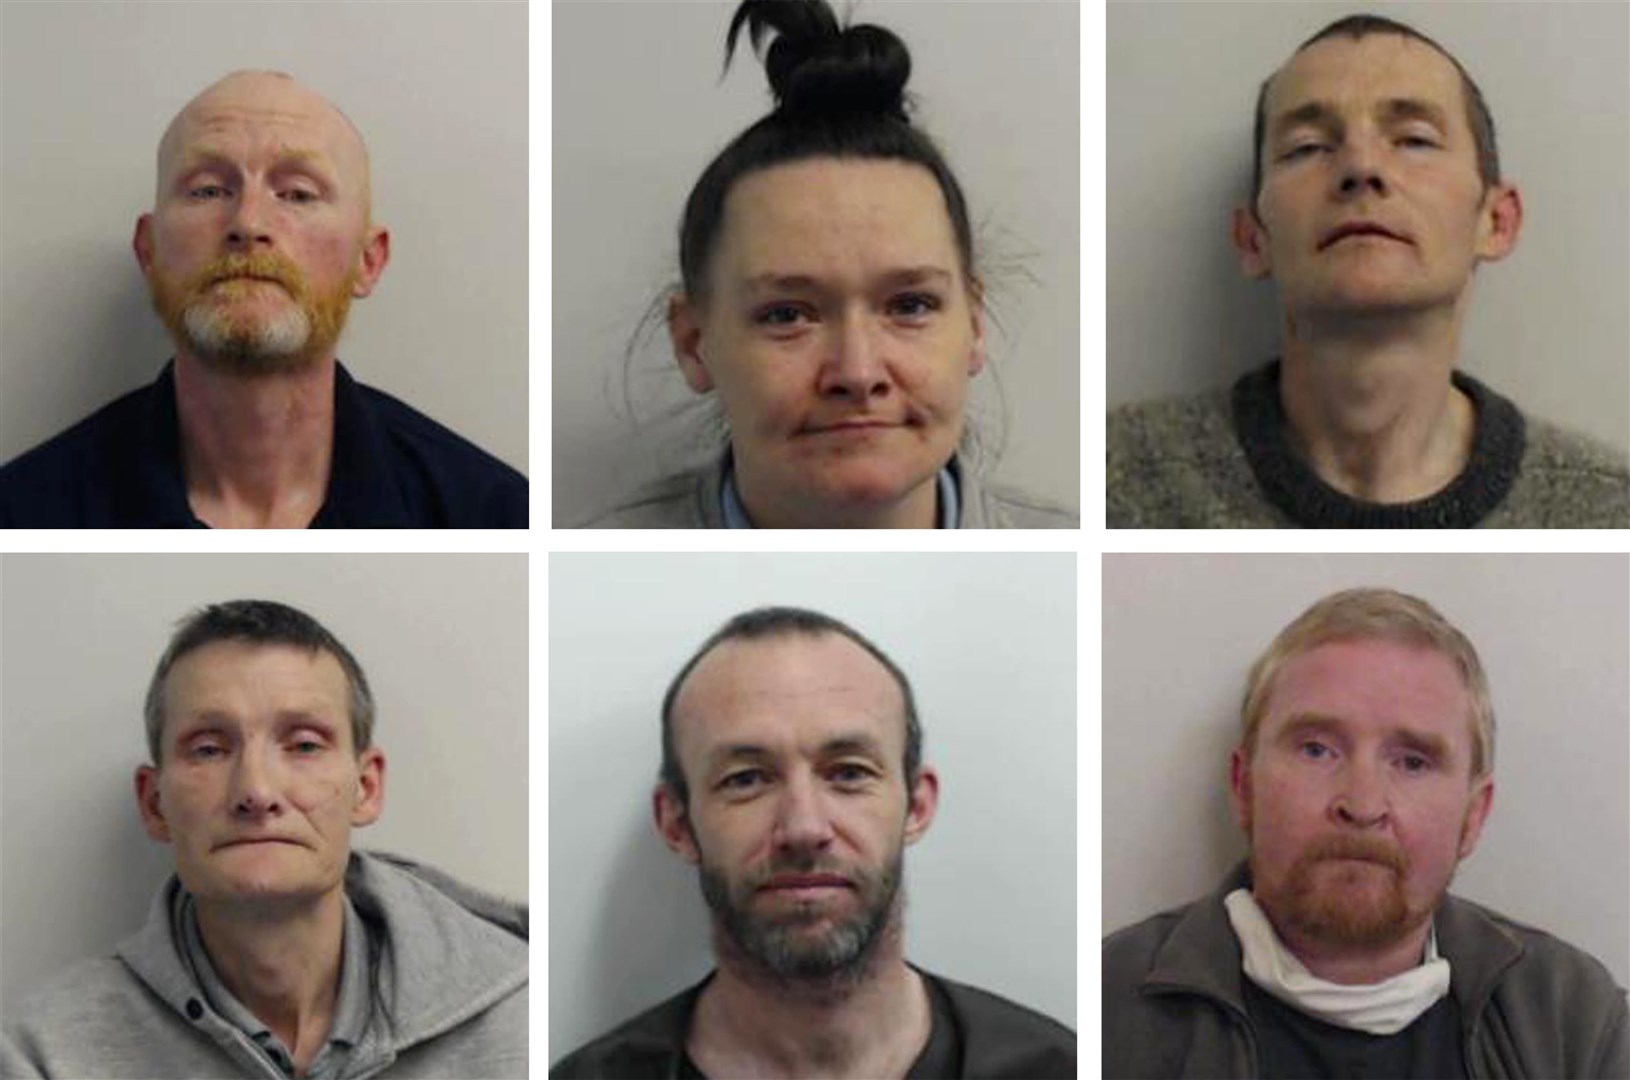 Top row, left to right: Barry Watson, 47; Elaine Lannery, 39; and Iain Owens, 45. Bottom row, left to right: John Clark, 47; Paul Brannan, 41; and Scott Forbes, 50 (Police Scotland/PA)